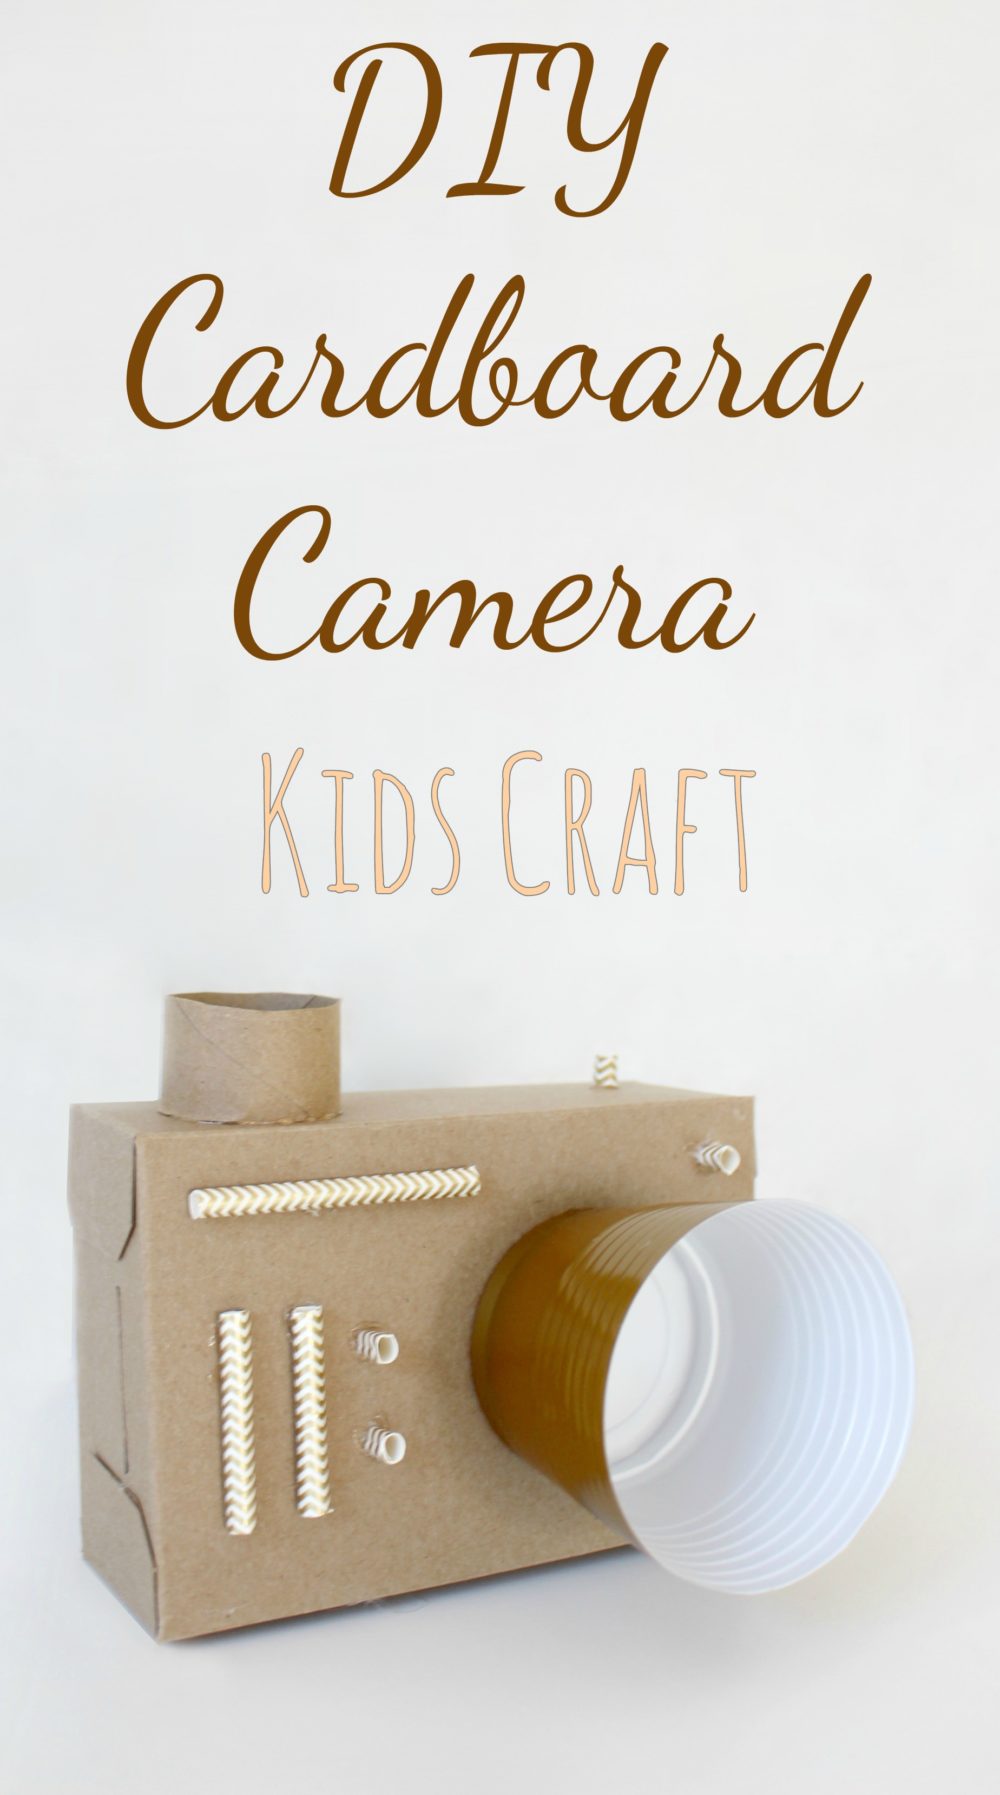 Encourage your kids to express their creativity with this DIY cardboard camera! This pretend play camera is loads of fun, simple and easy to make by or with kids!